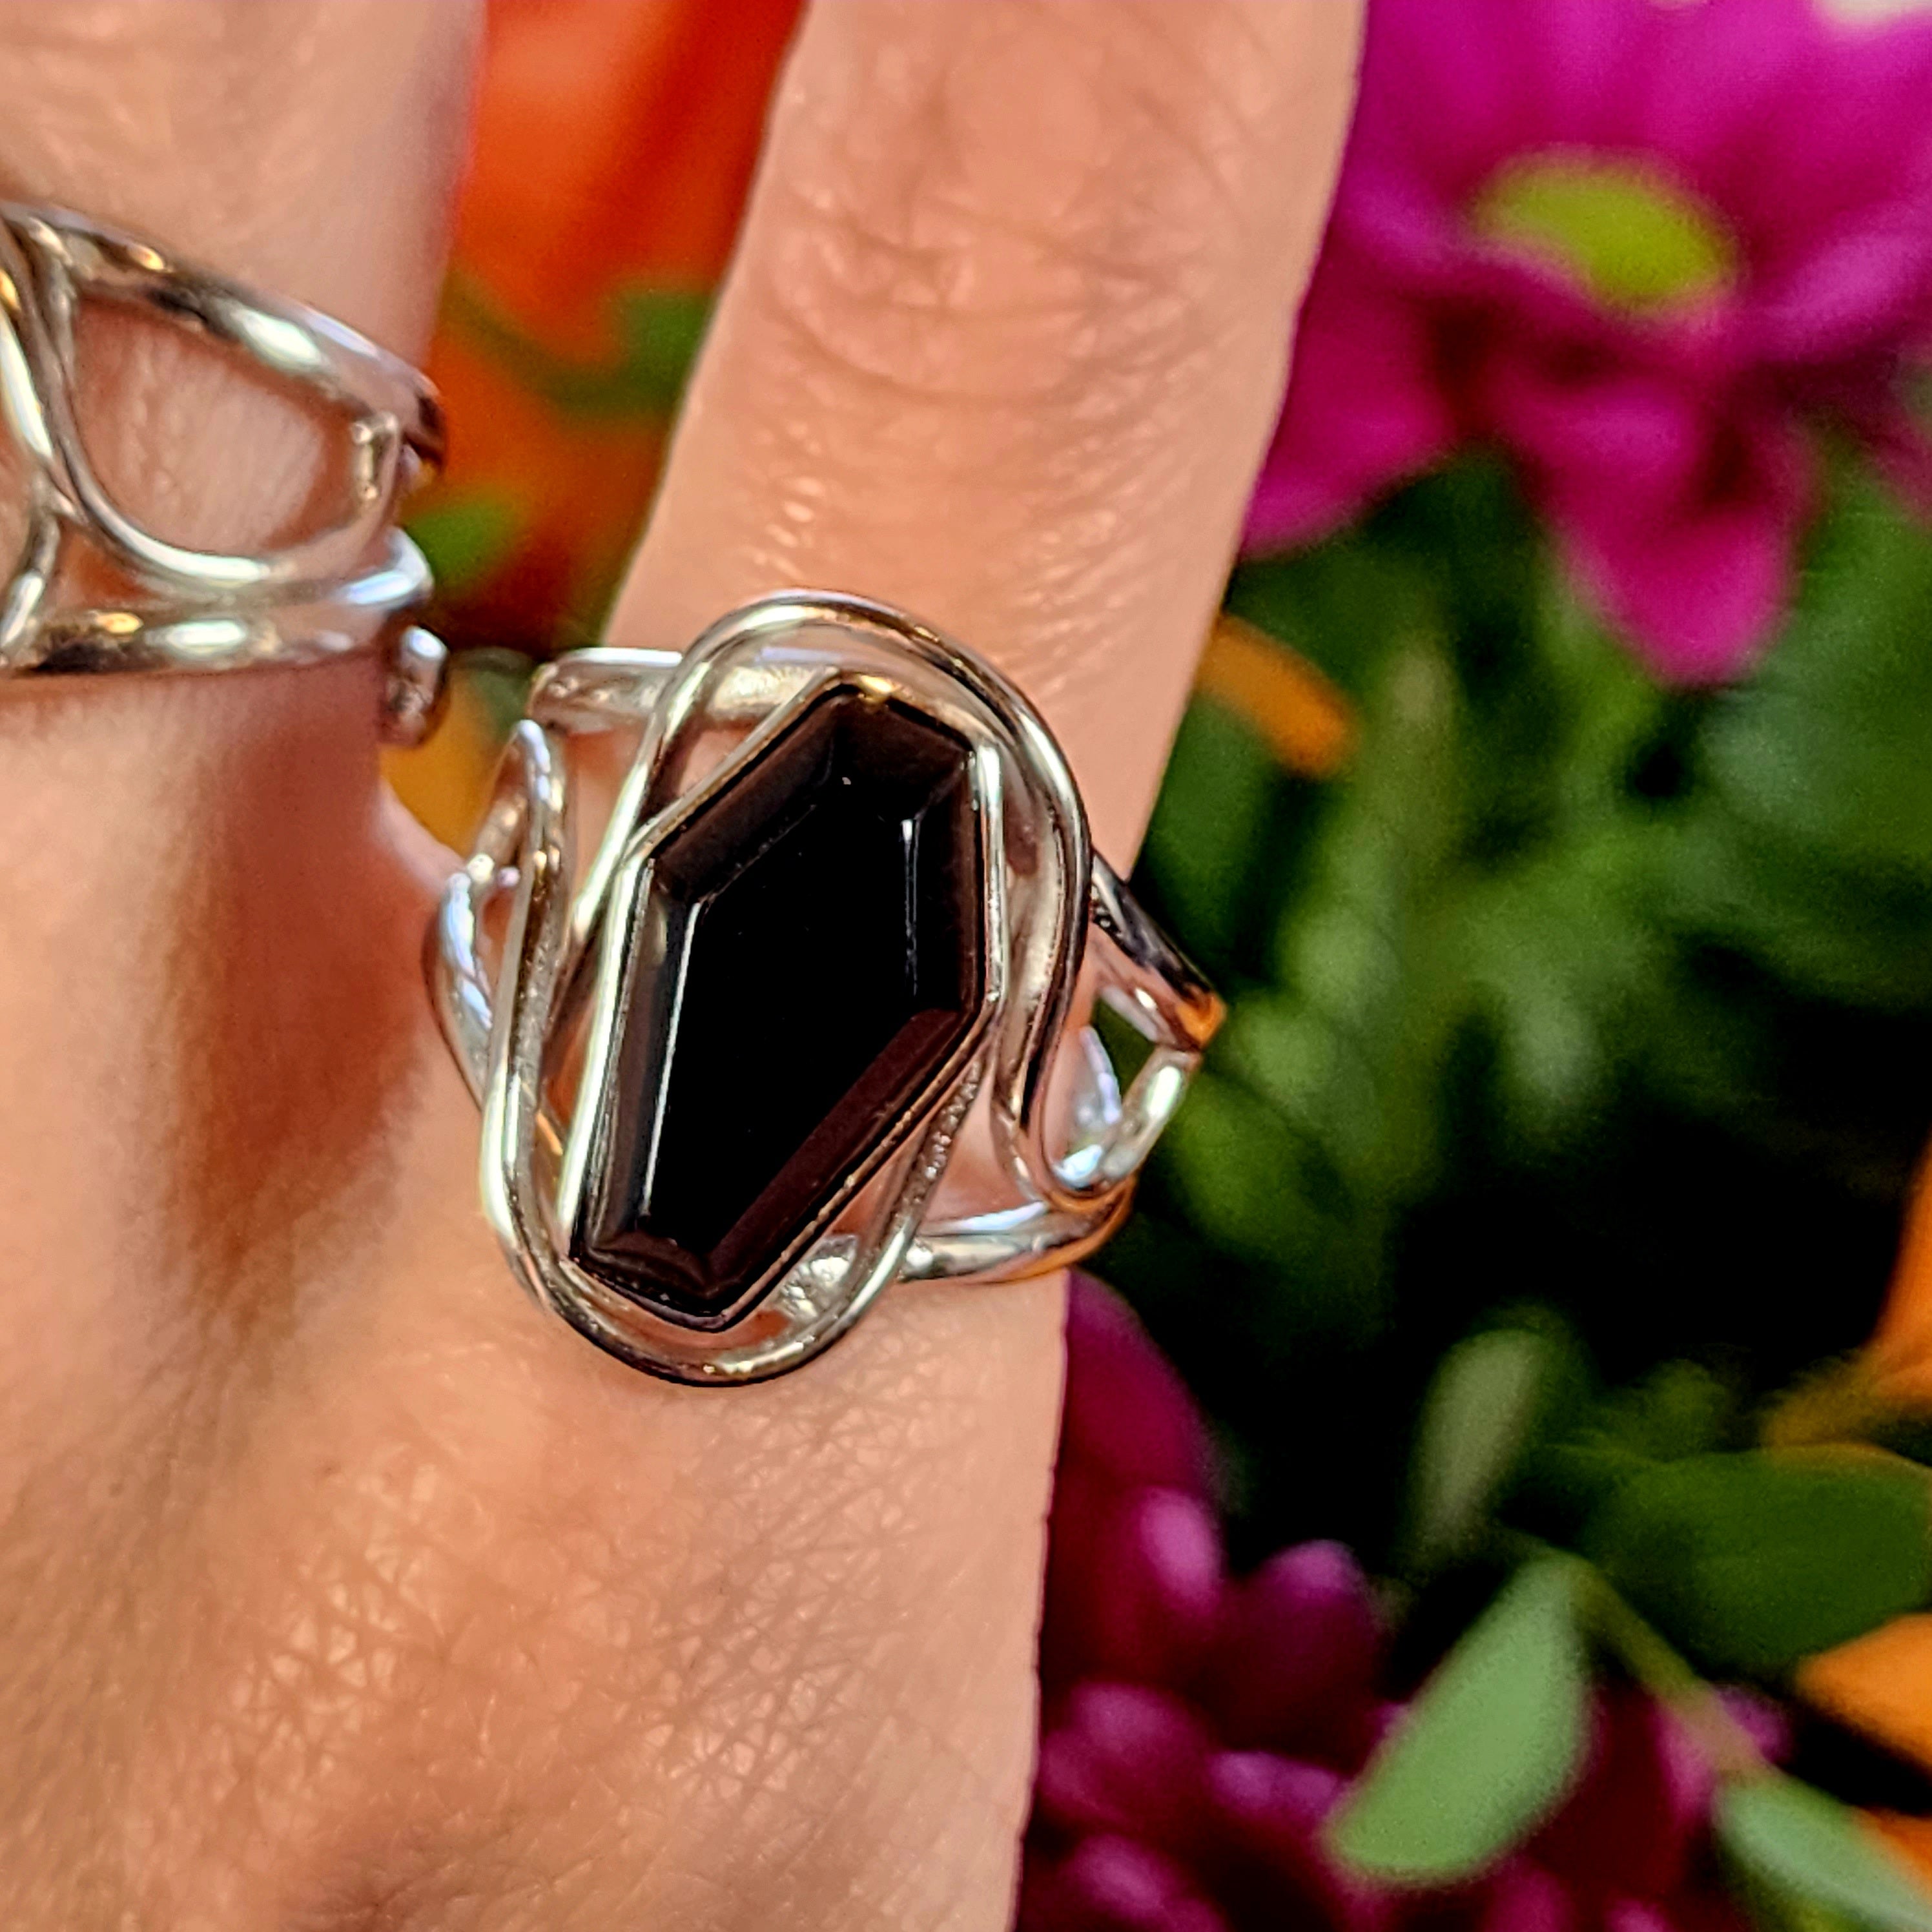 Black Obsidian Coffin Finger Cuff Adjustable Ring .925 Silver for Powerful Protection and Rising Above Negative Vibes